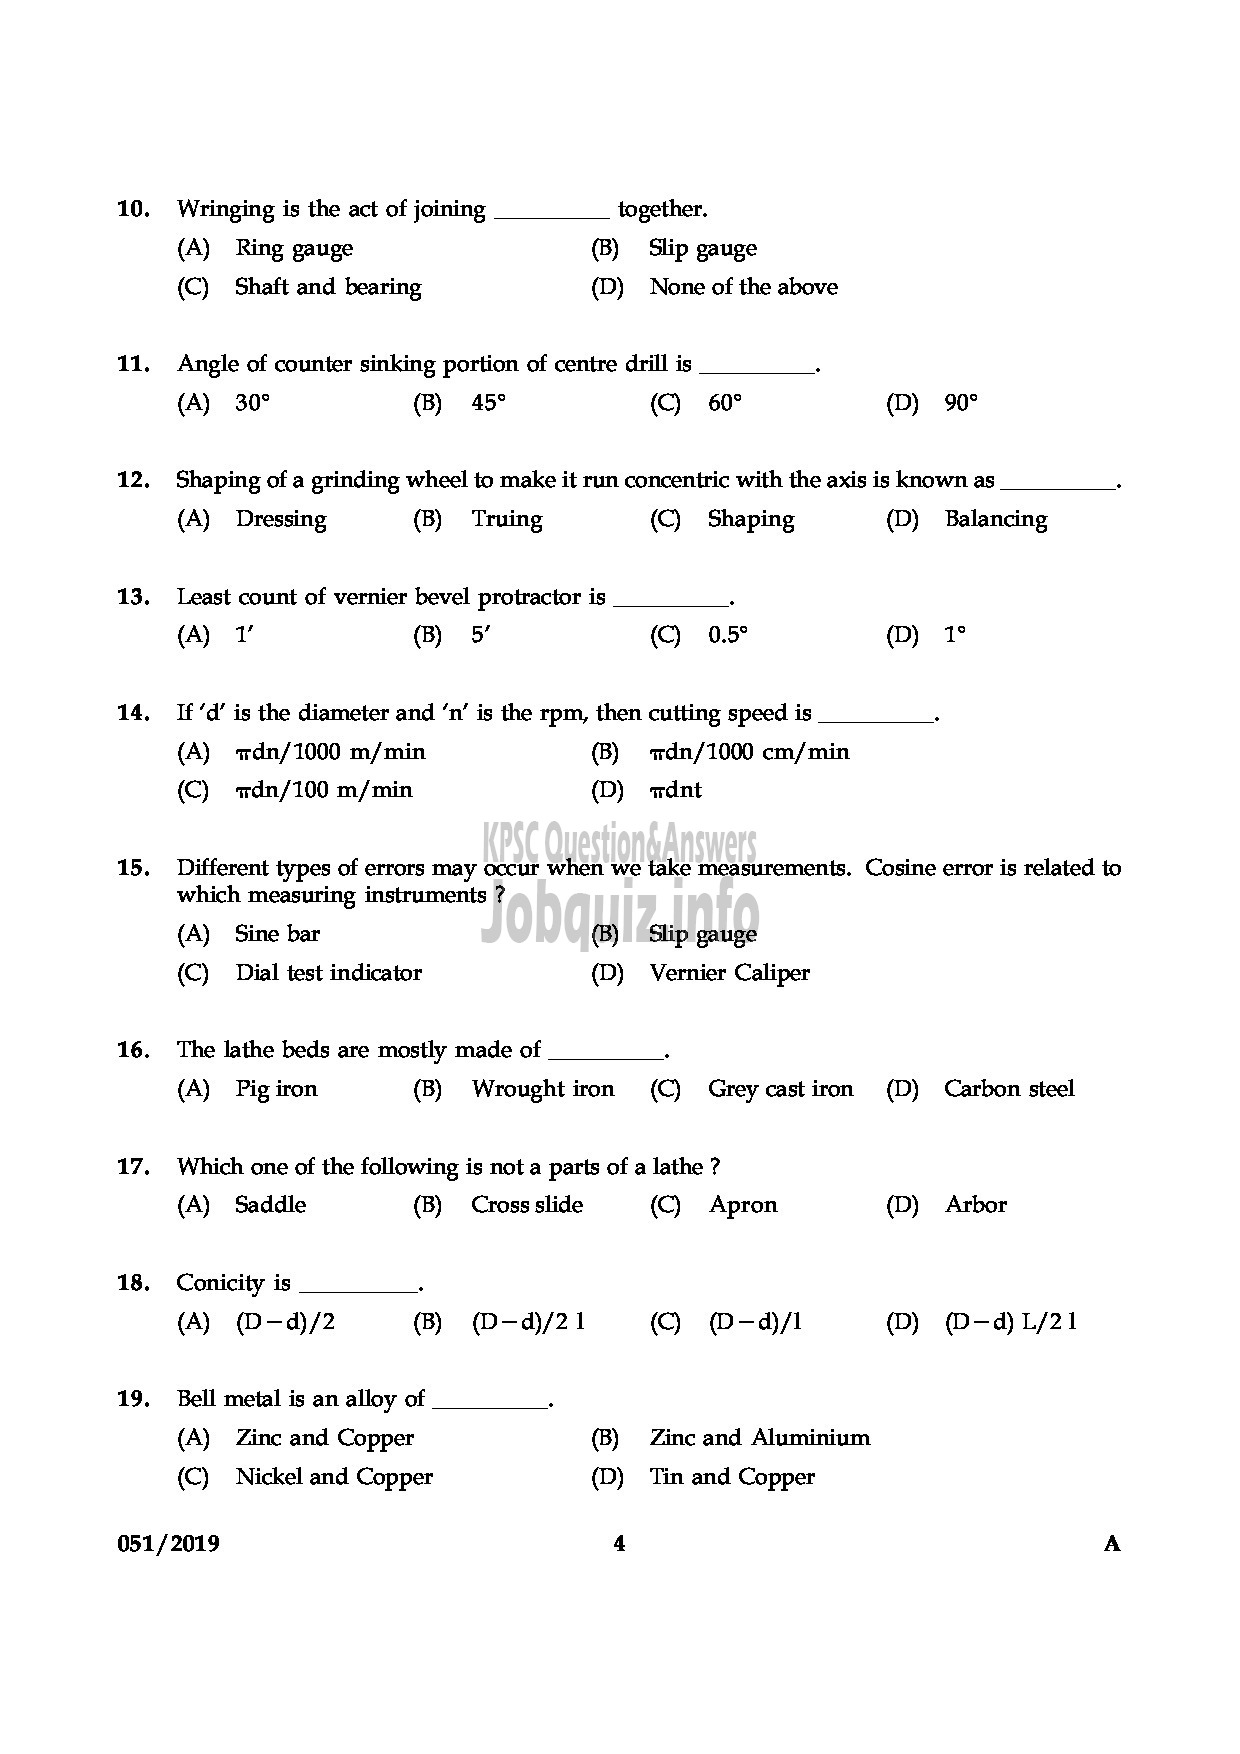 Kerala PSC Question Paper - JUNIOR INSTRUCTOR TOOL & DIE MAKER INDUSTRIAL TRAINING English -4